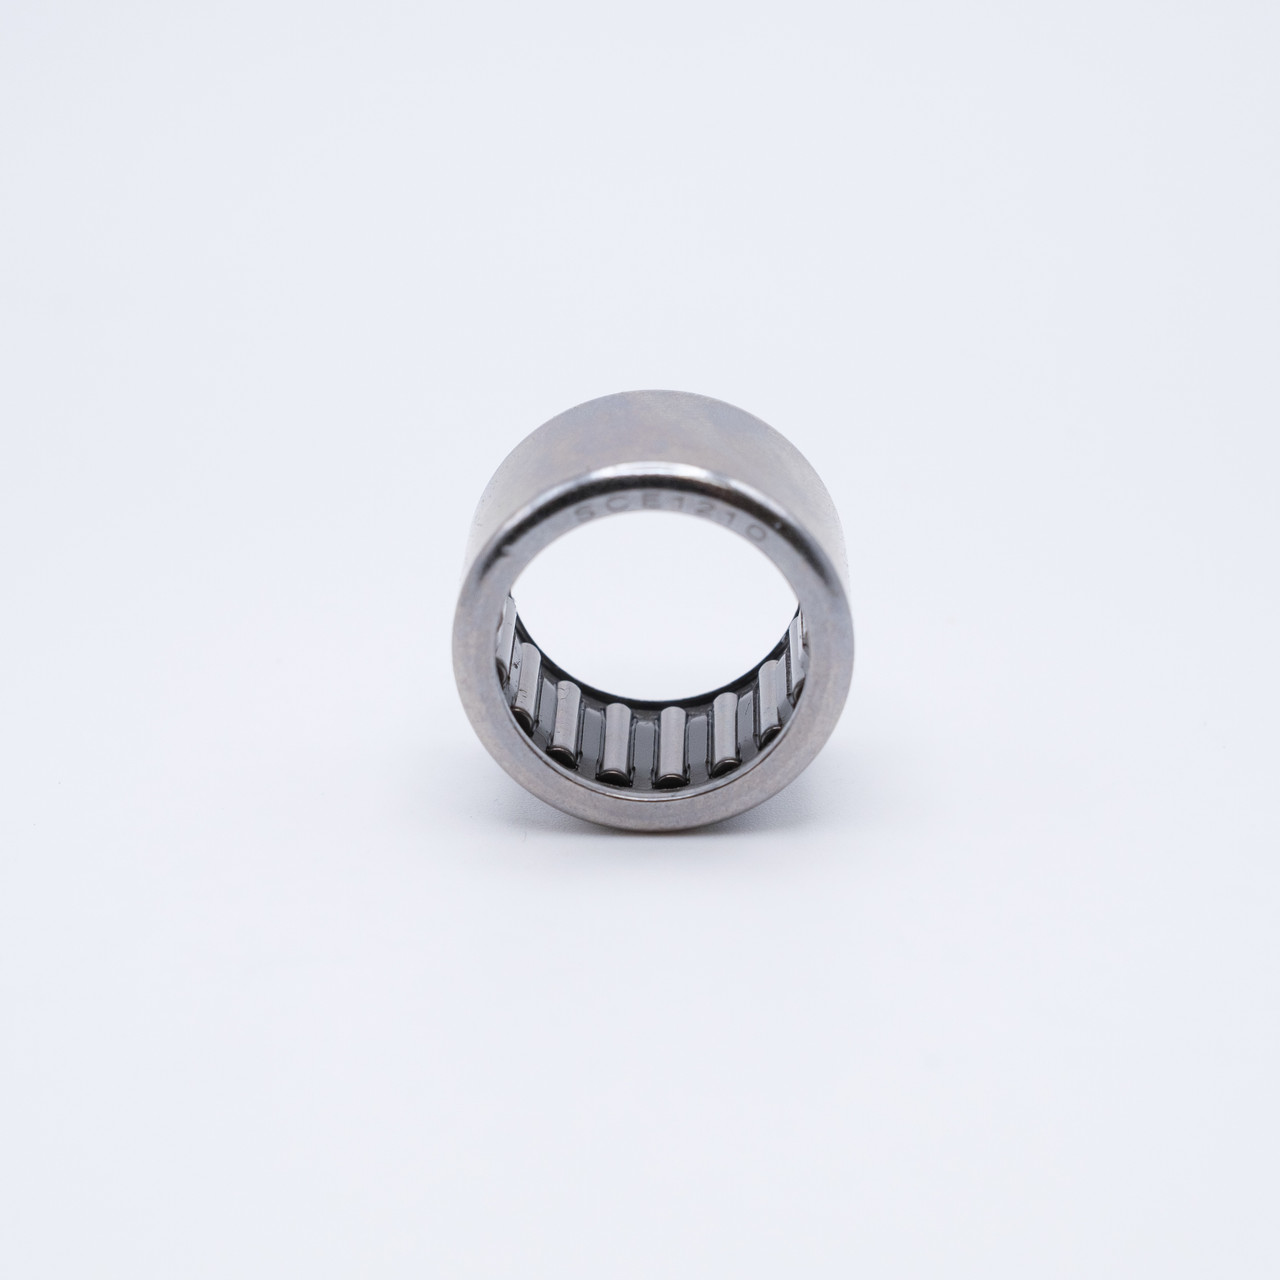 J1216 Needle Roller Bearing 3/4x1x1 Front View